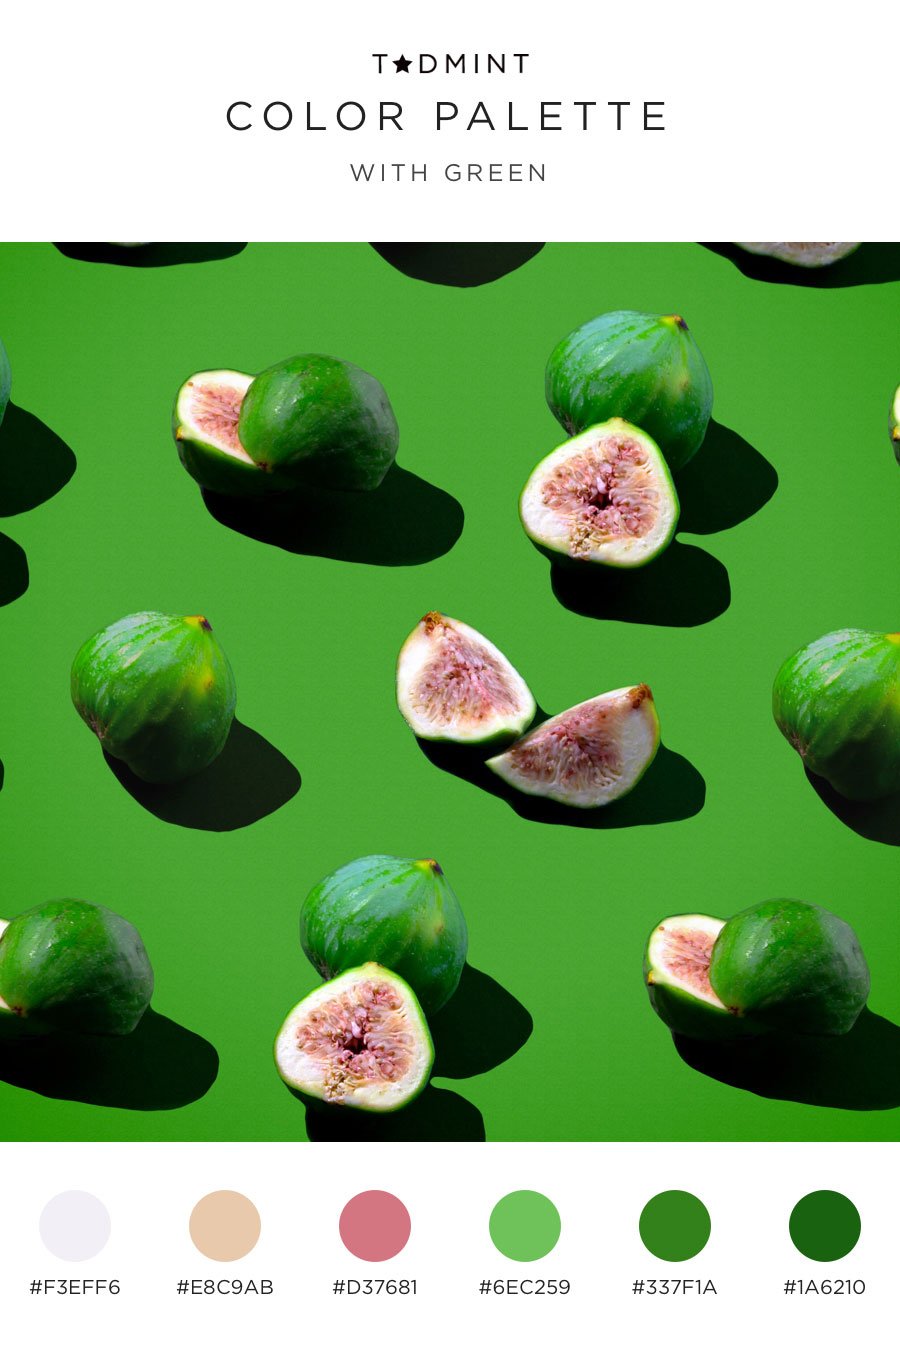 color palettes with green inspired by figs